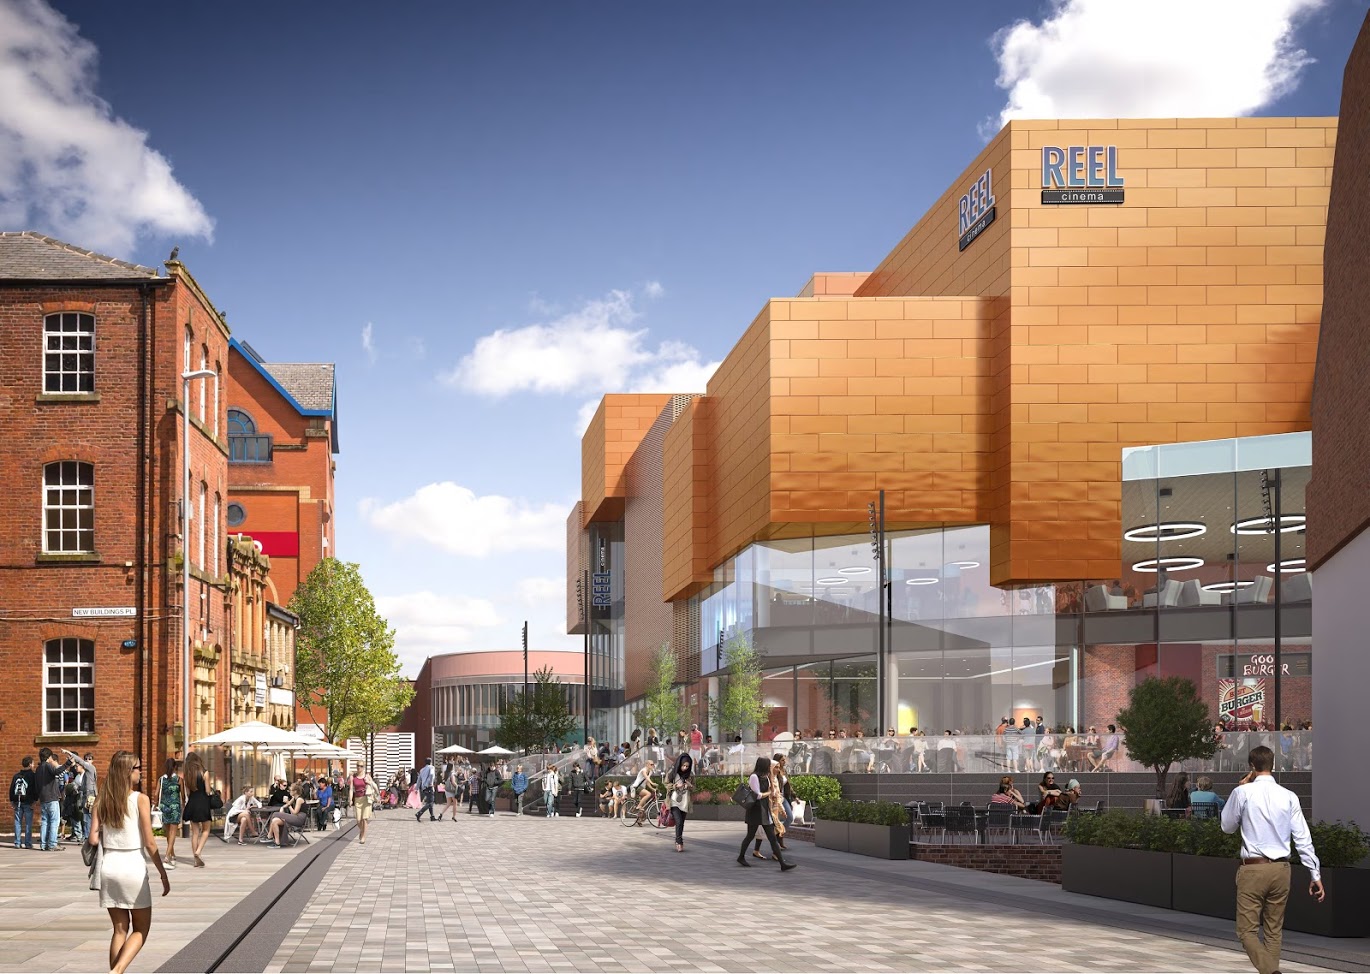 Image: Rochdale Riverside planning application submitted